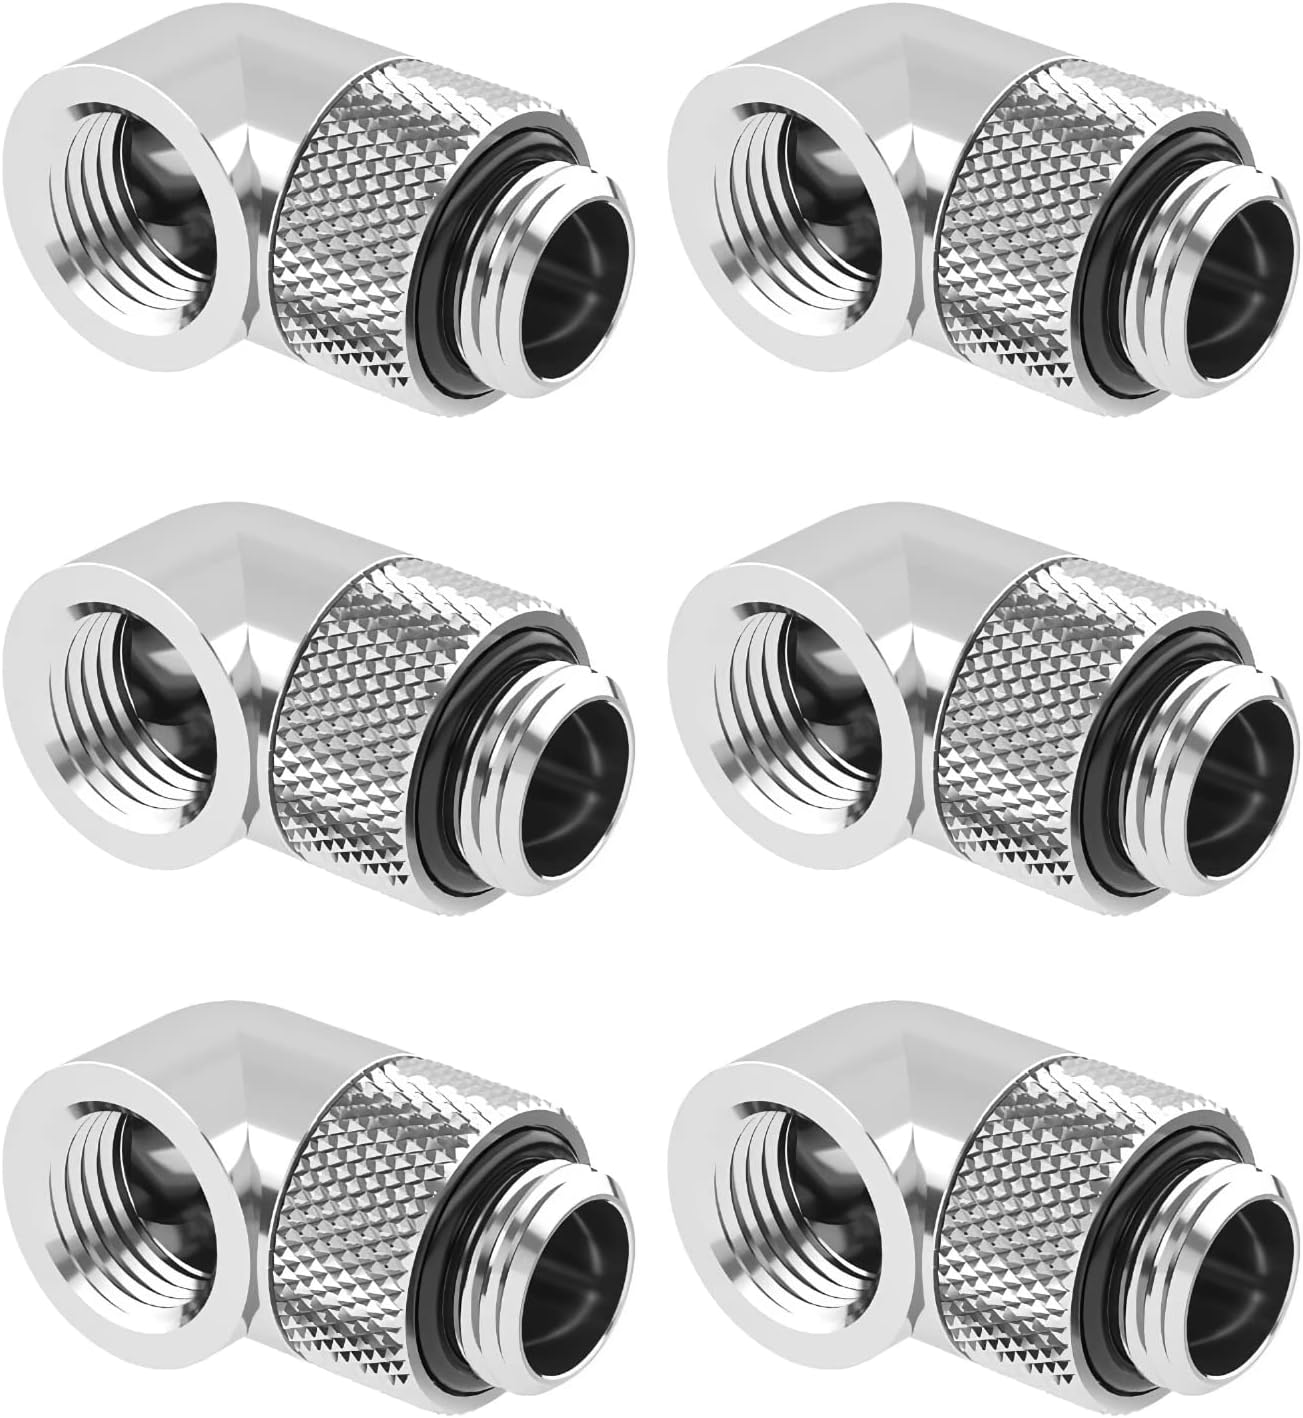 Dracaena 6 Pack G1/4 Thread Male to Female Extender Fitting, 90° Rotary Fitting Adapter Connector for Computer Water Cooling System, White